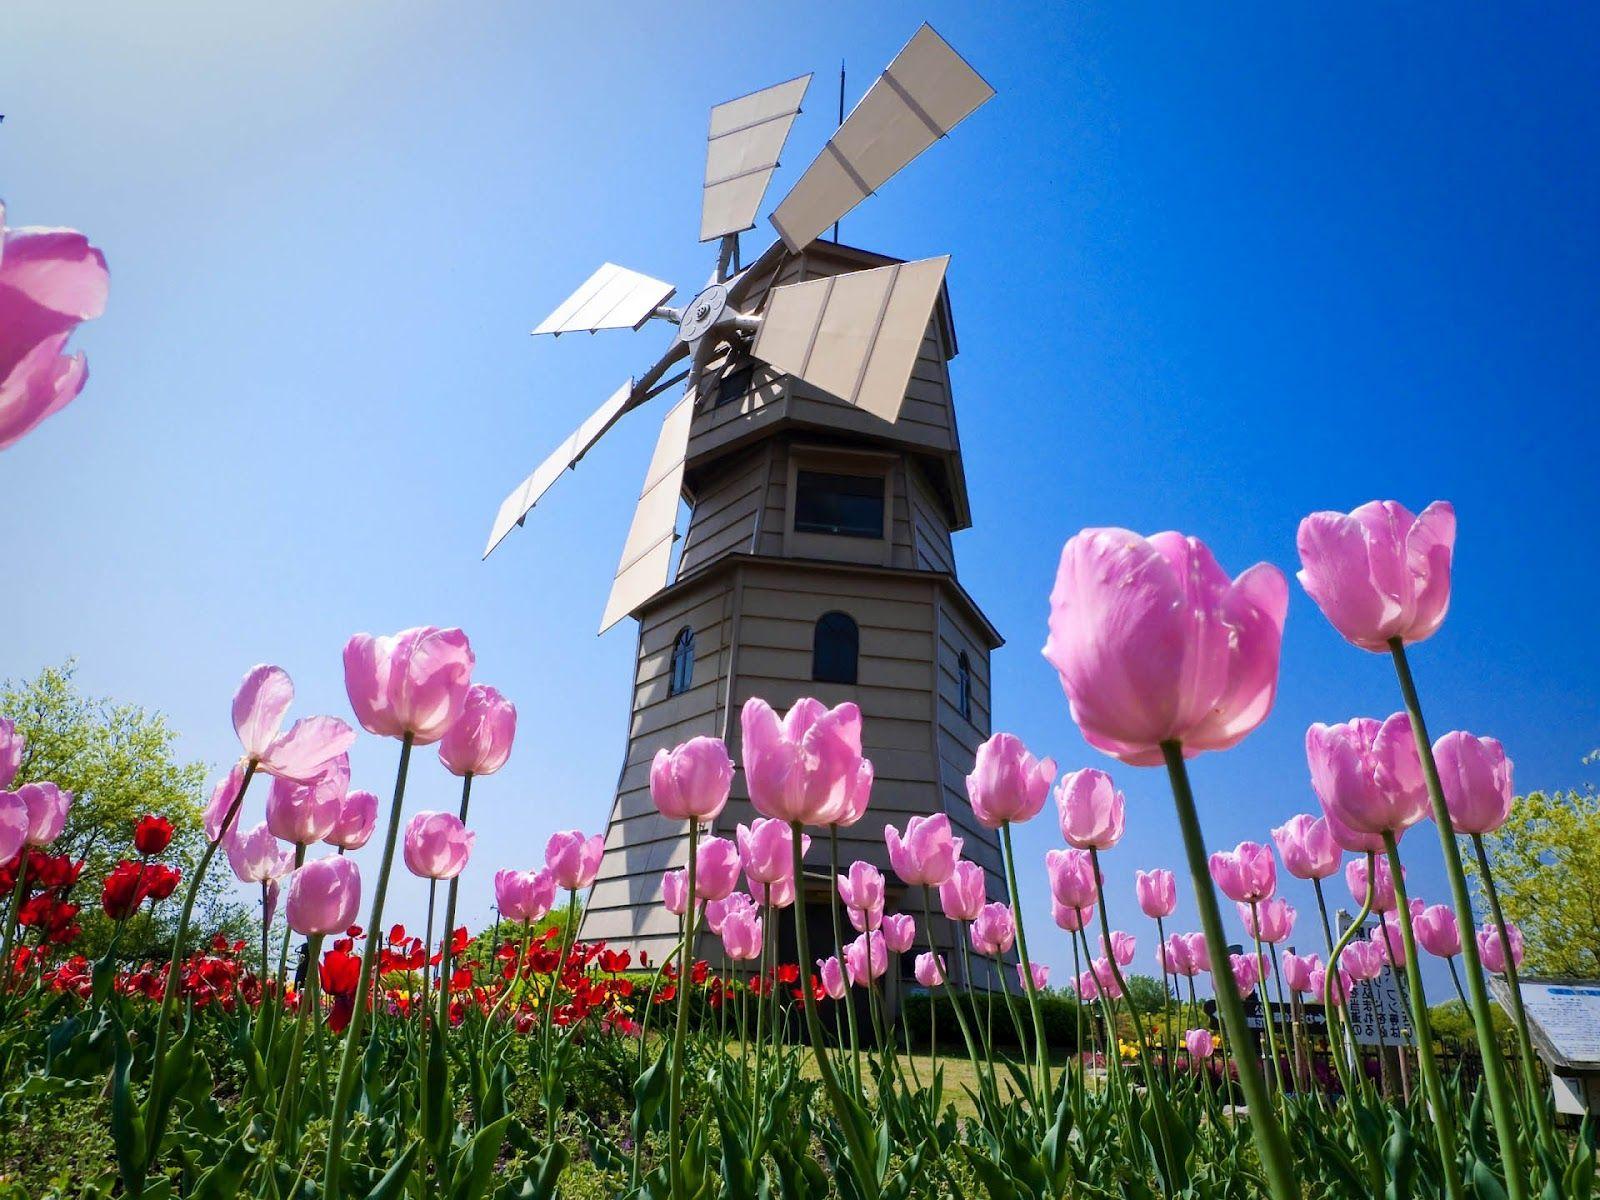 Dutch windmill and tulips. take me away. Spring